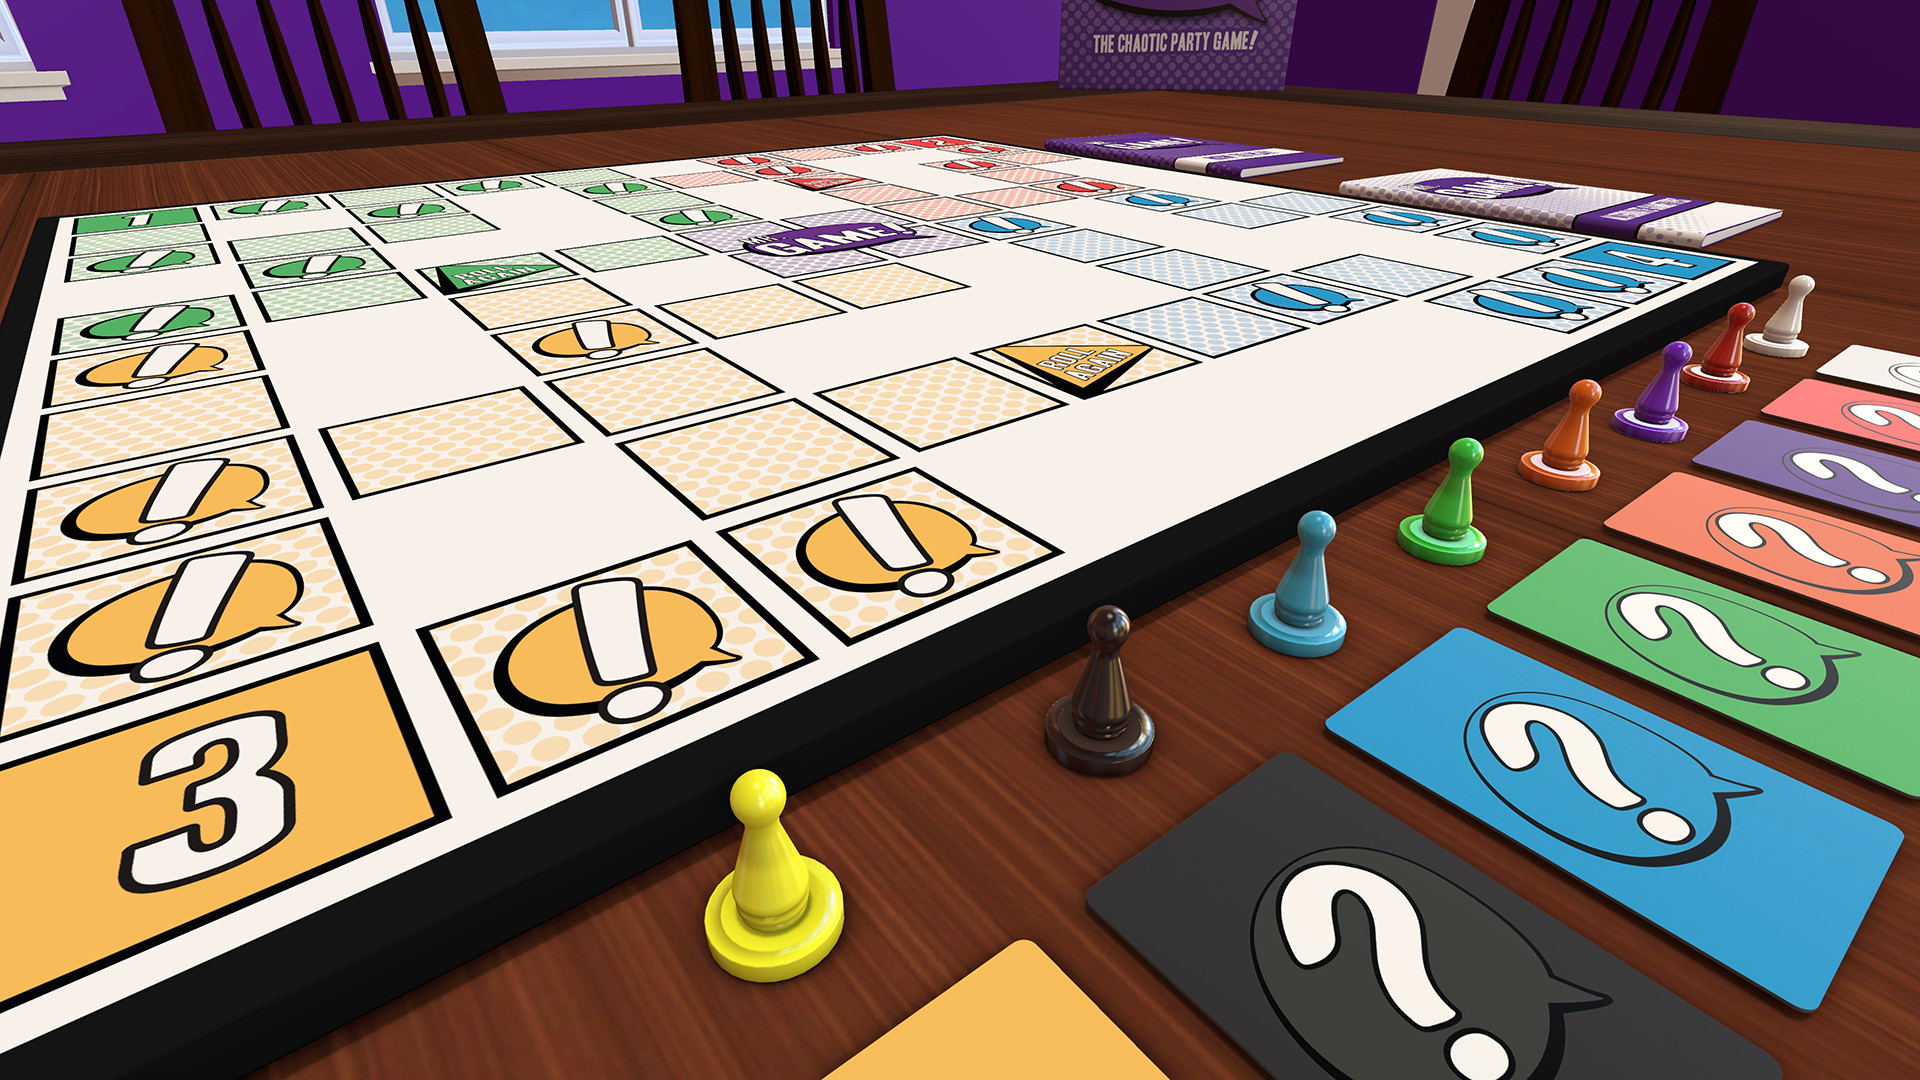 tabletop simulator cracked with steam workshop